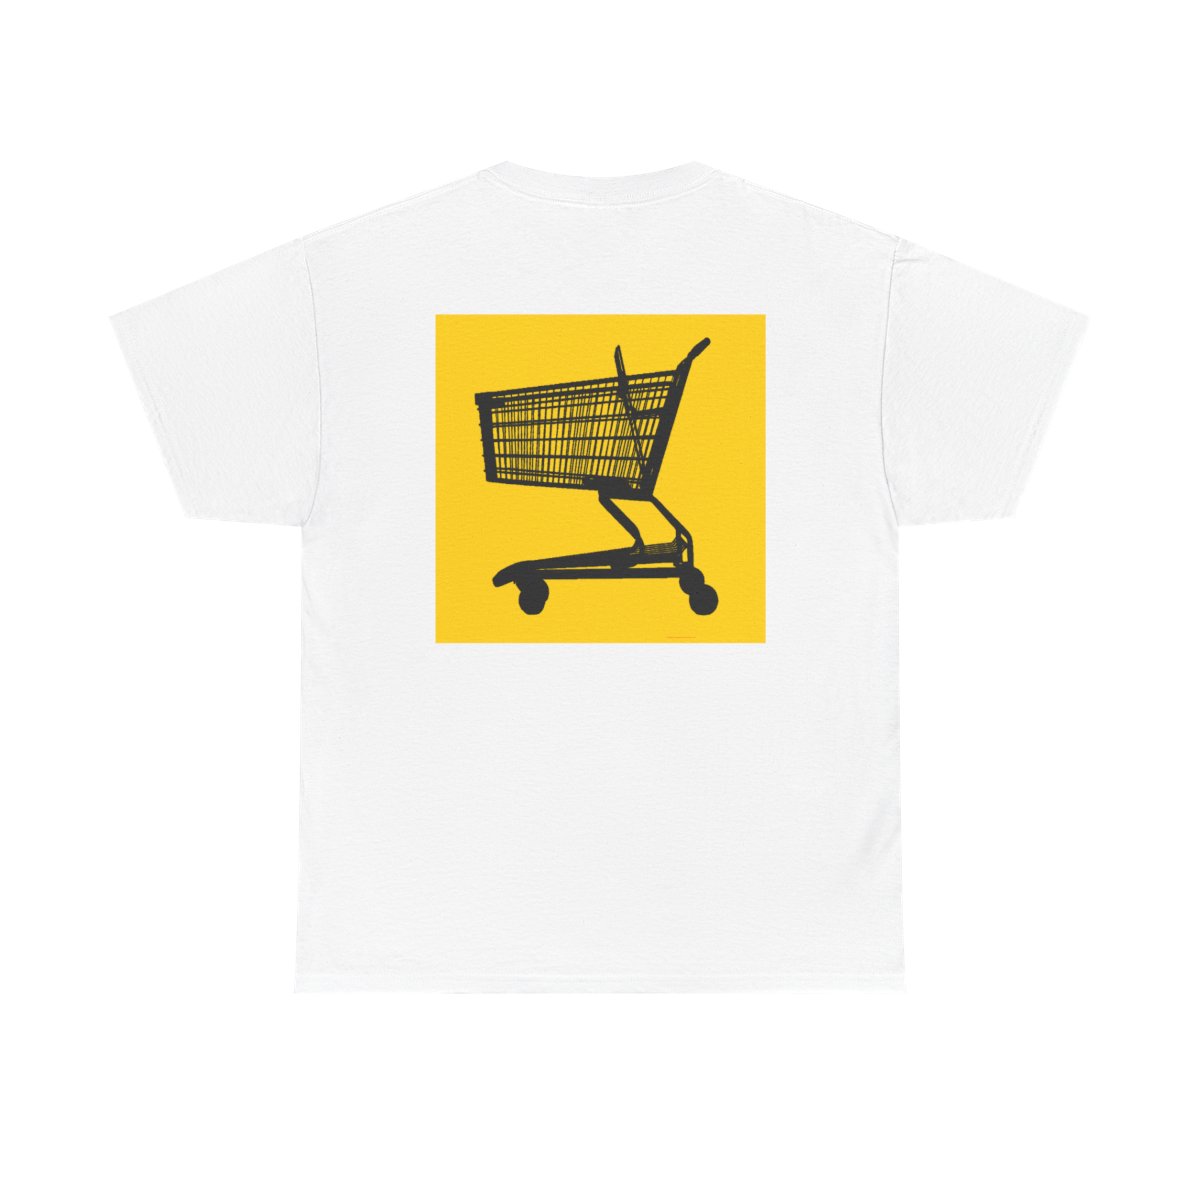 Shopping Cart T in many colors product thumbnail image